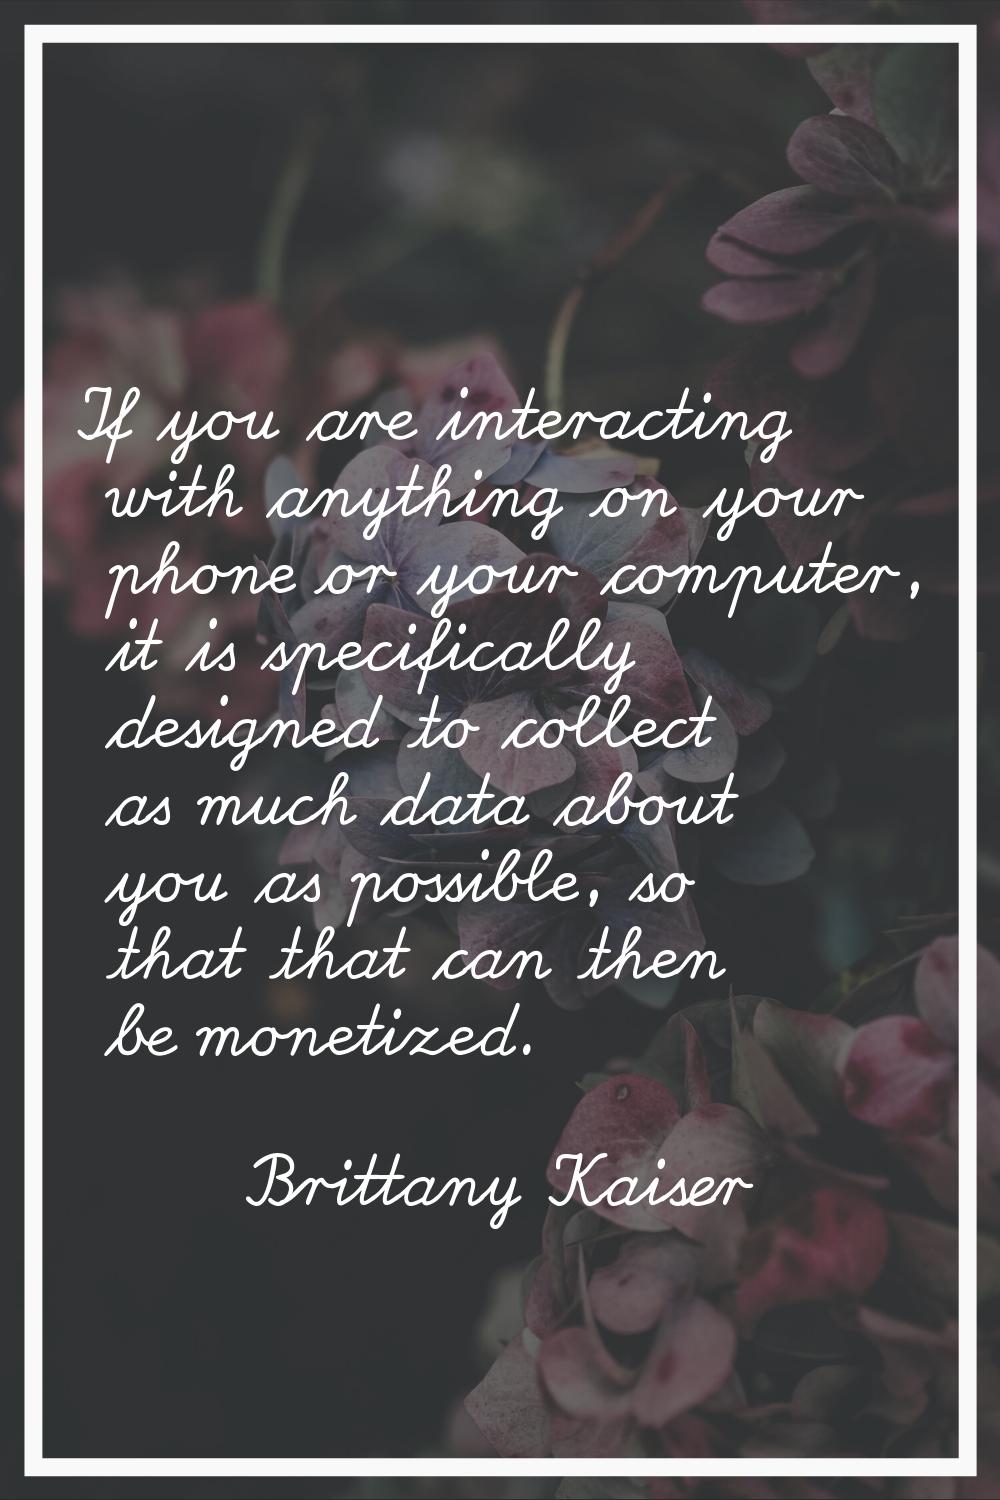 If you are interacting with anything on your phone or your computer, it is specifically designed to